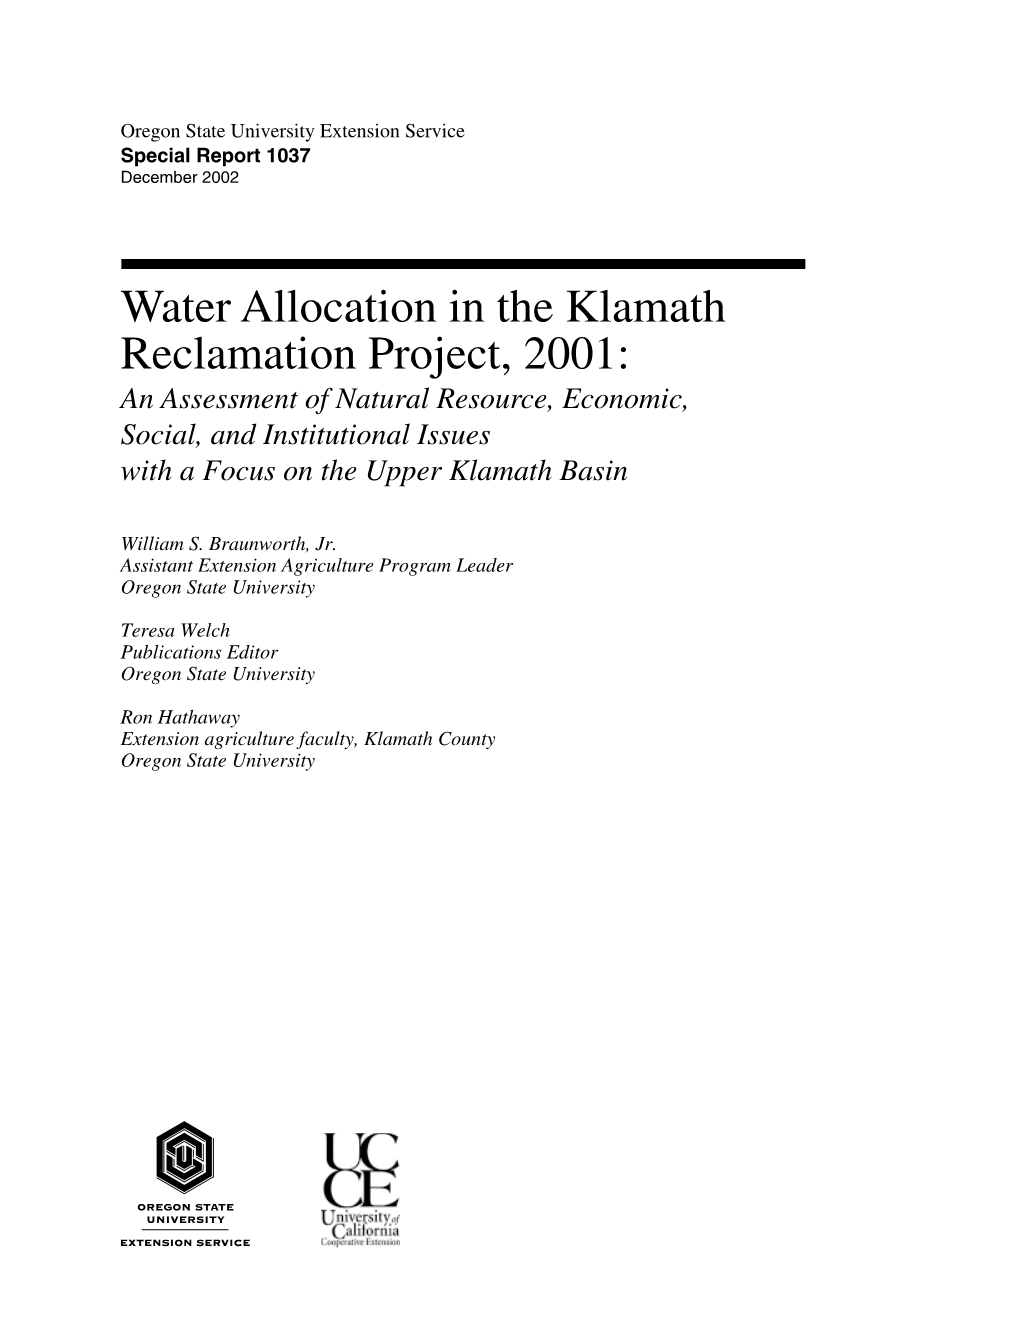 Water Allocation in the Klamath Reclamation Project (Oregon State